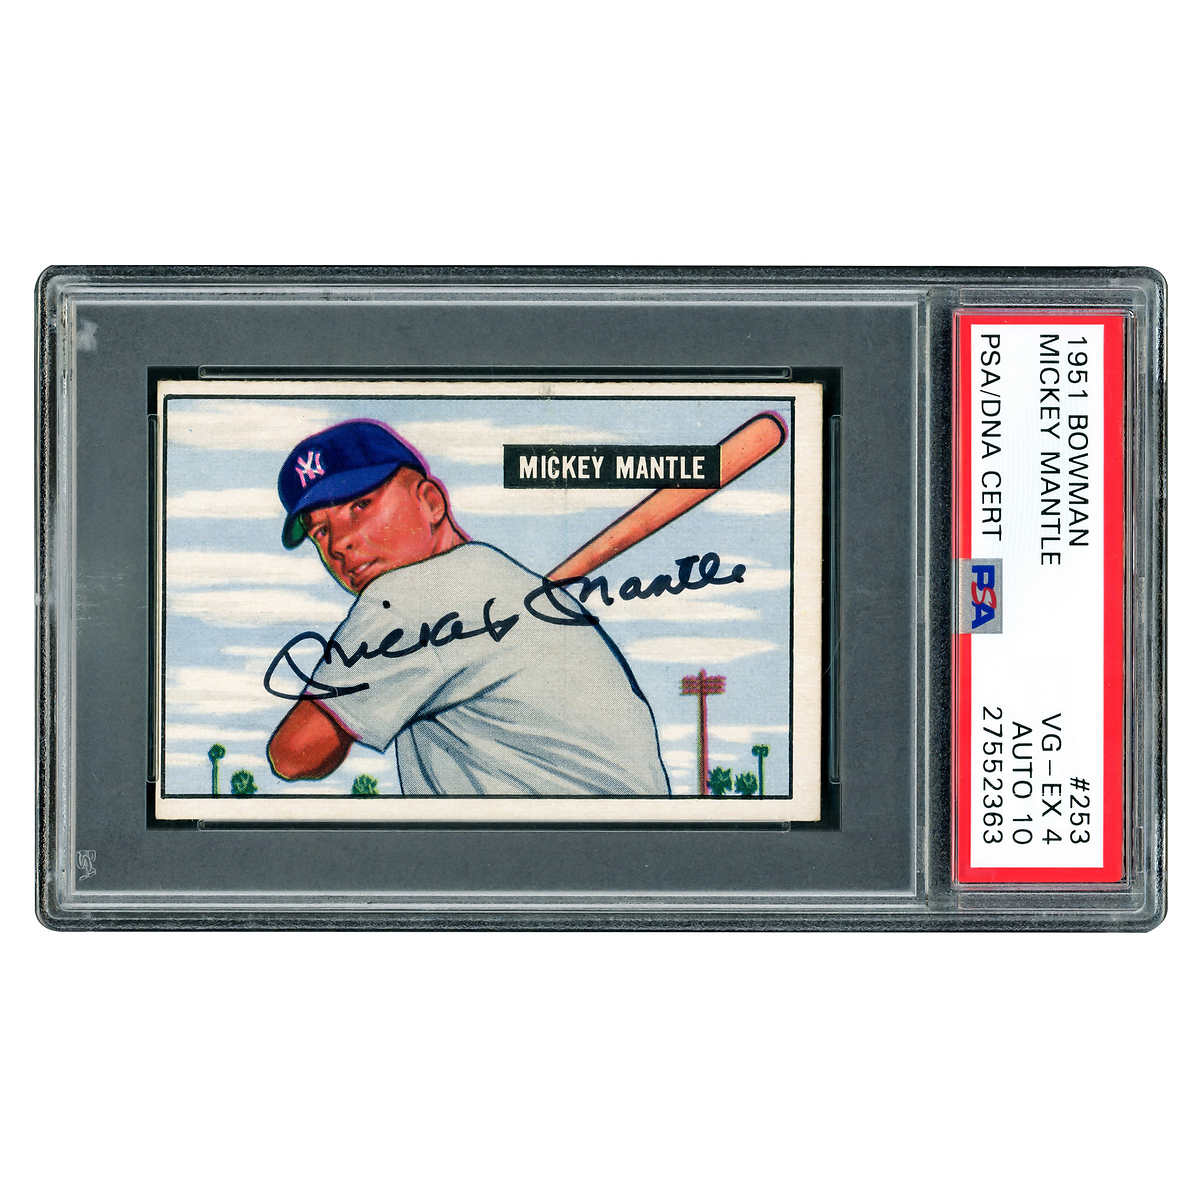 Mickey Mantle cards continue to set records, 1951 Bowman rookie